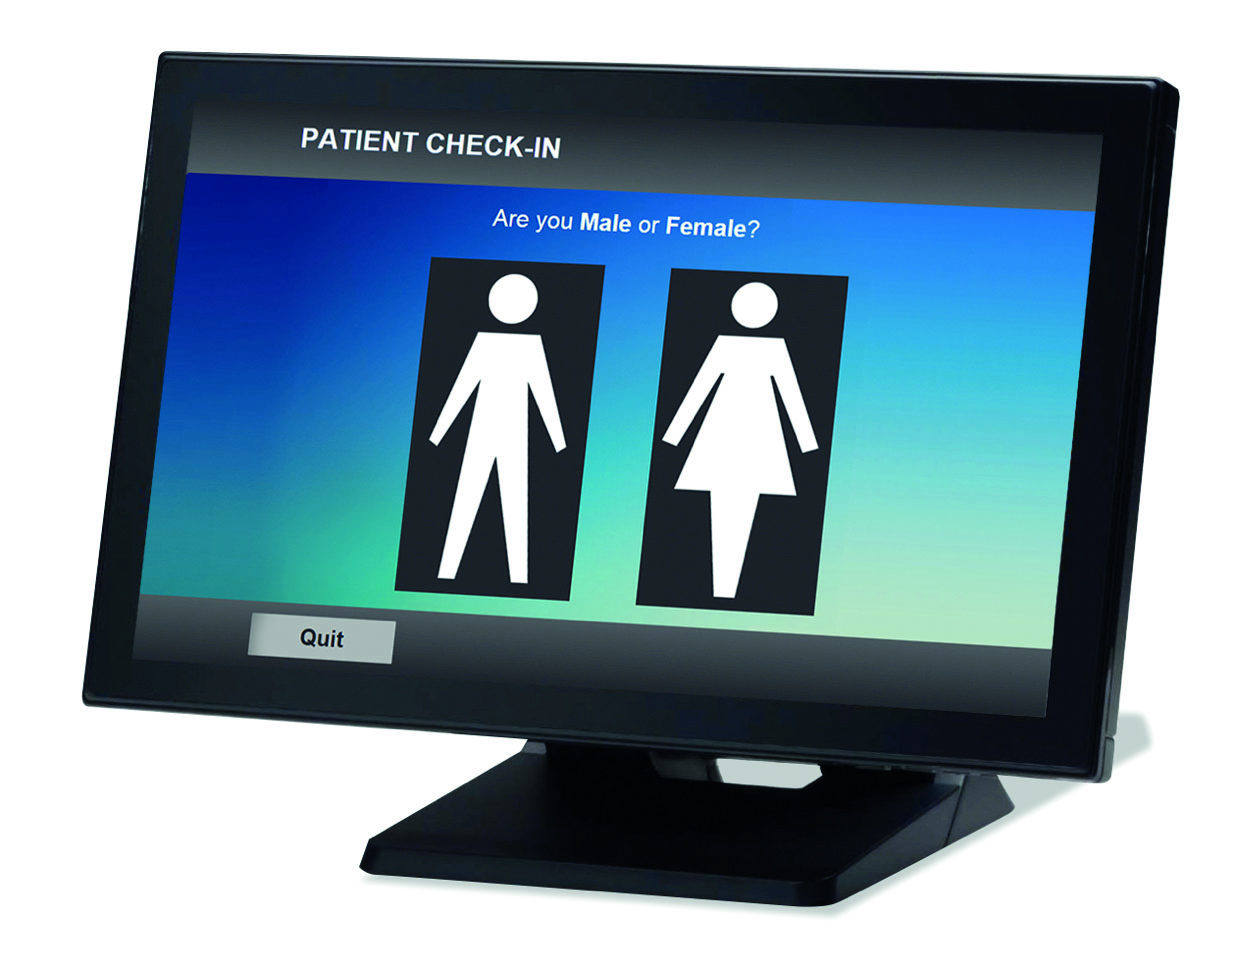 Touchscreen patient self check in